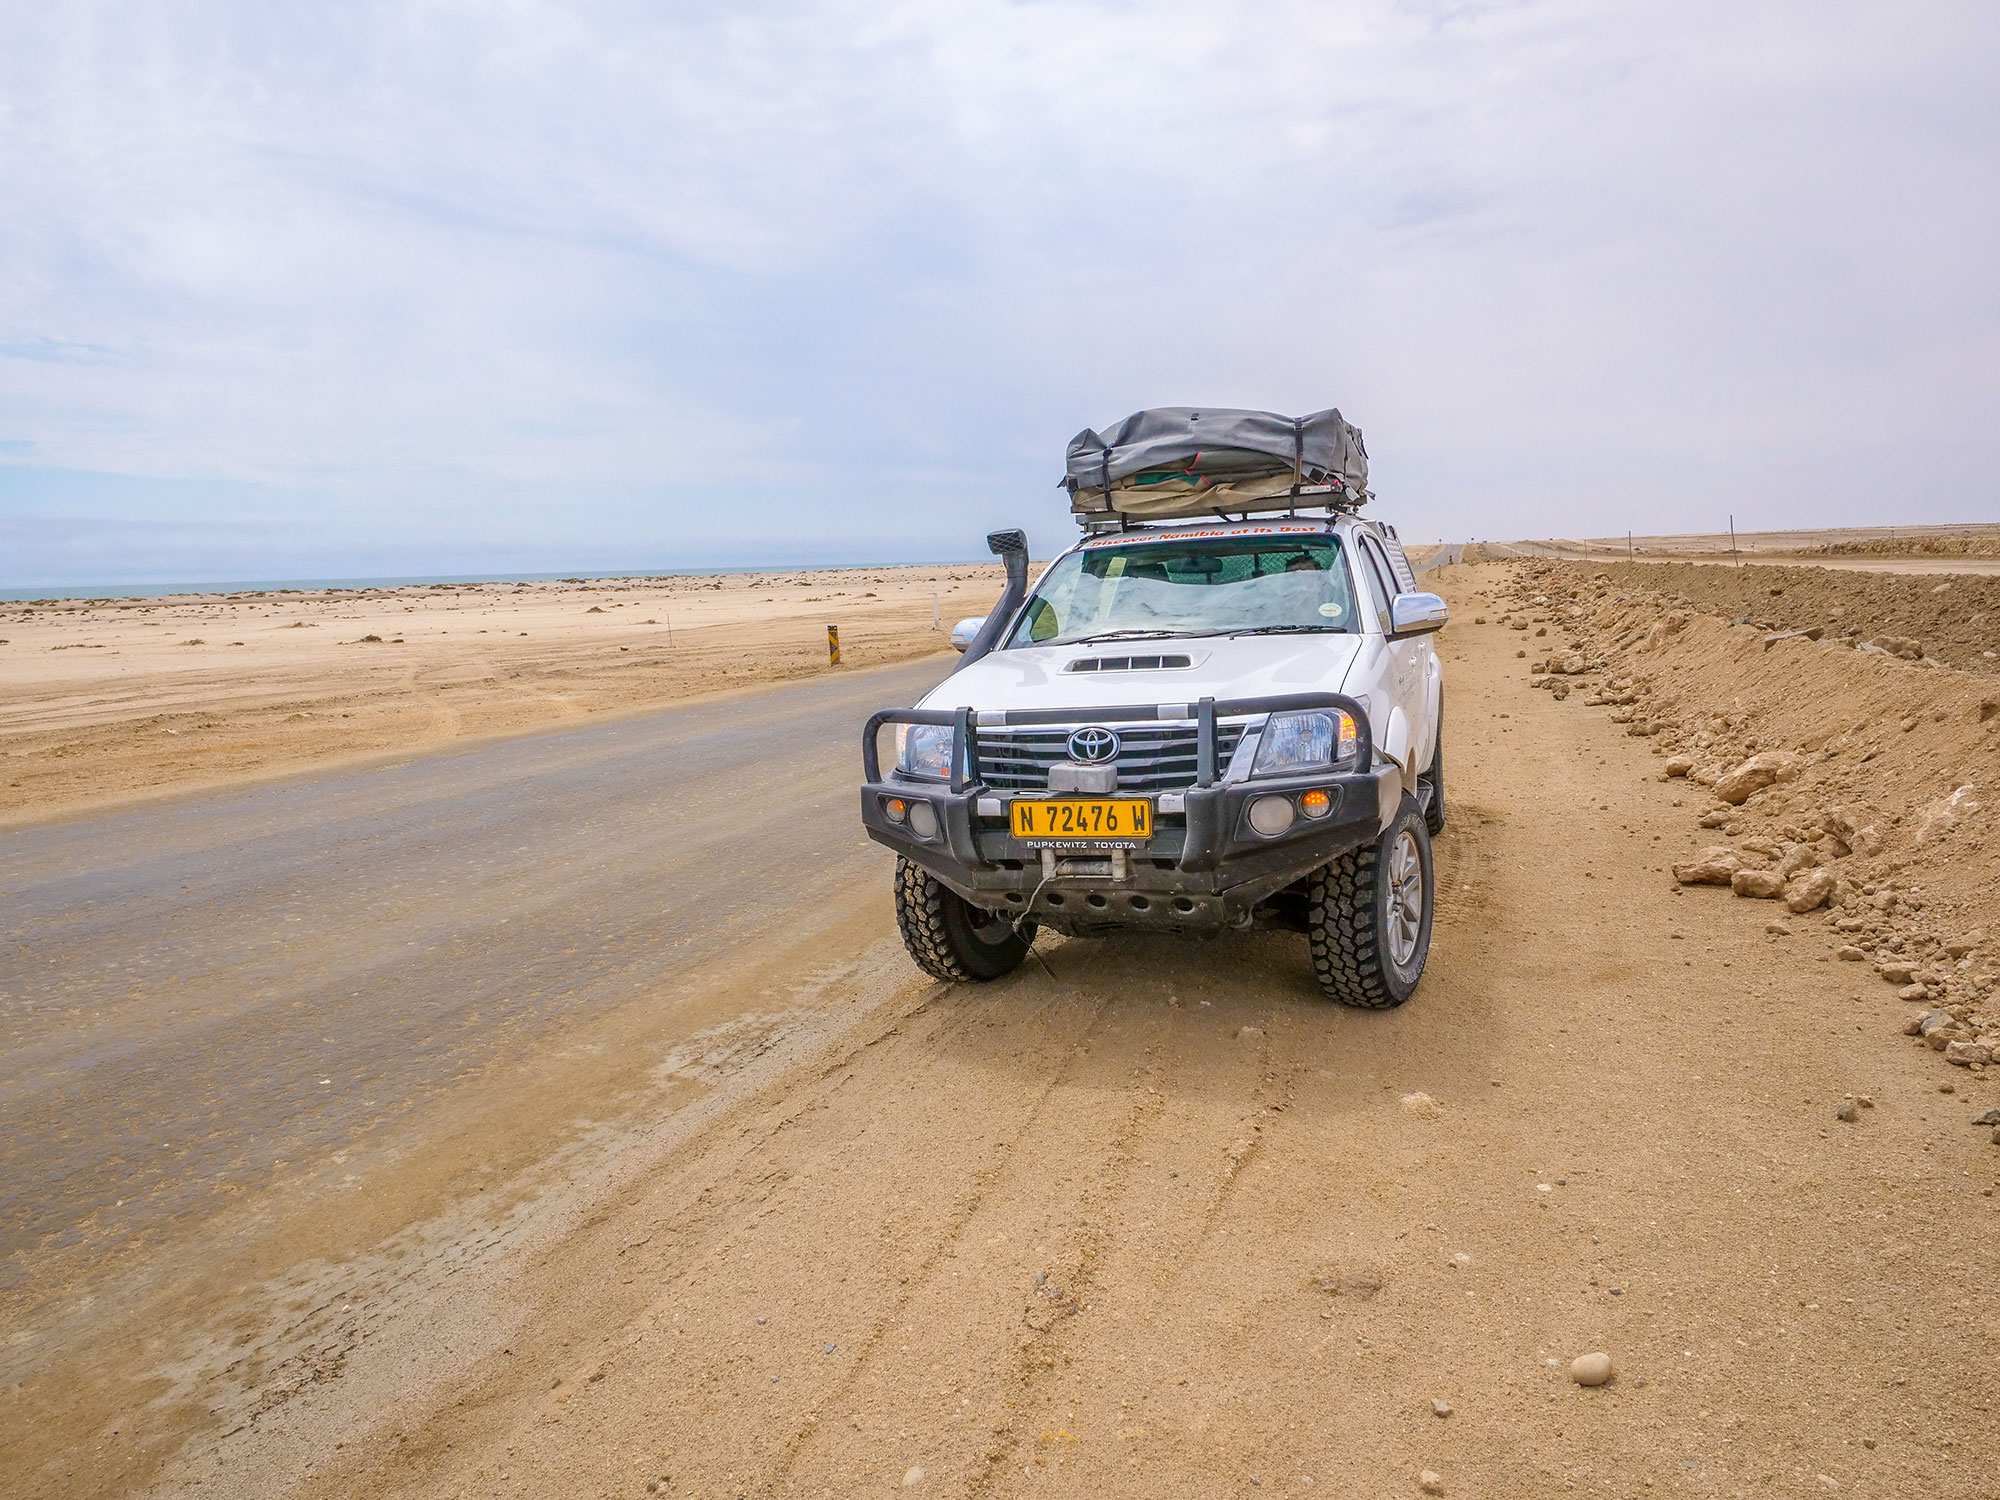 Toyota Hilux self-drive through the desert in the Skeleton Coast, Namibia, Africa